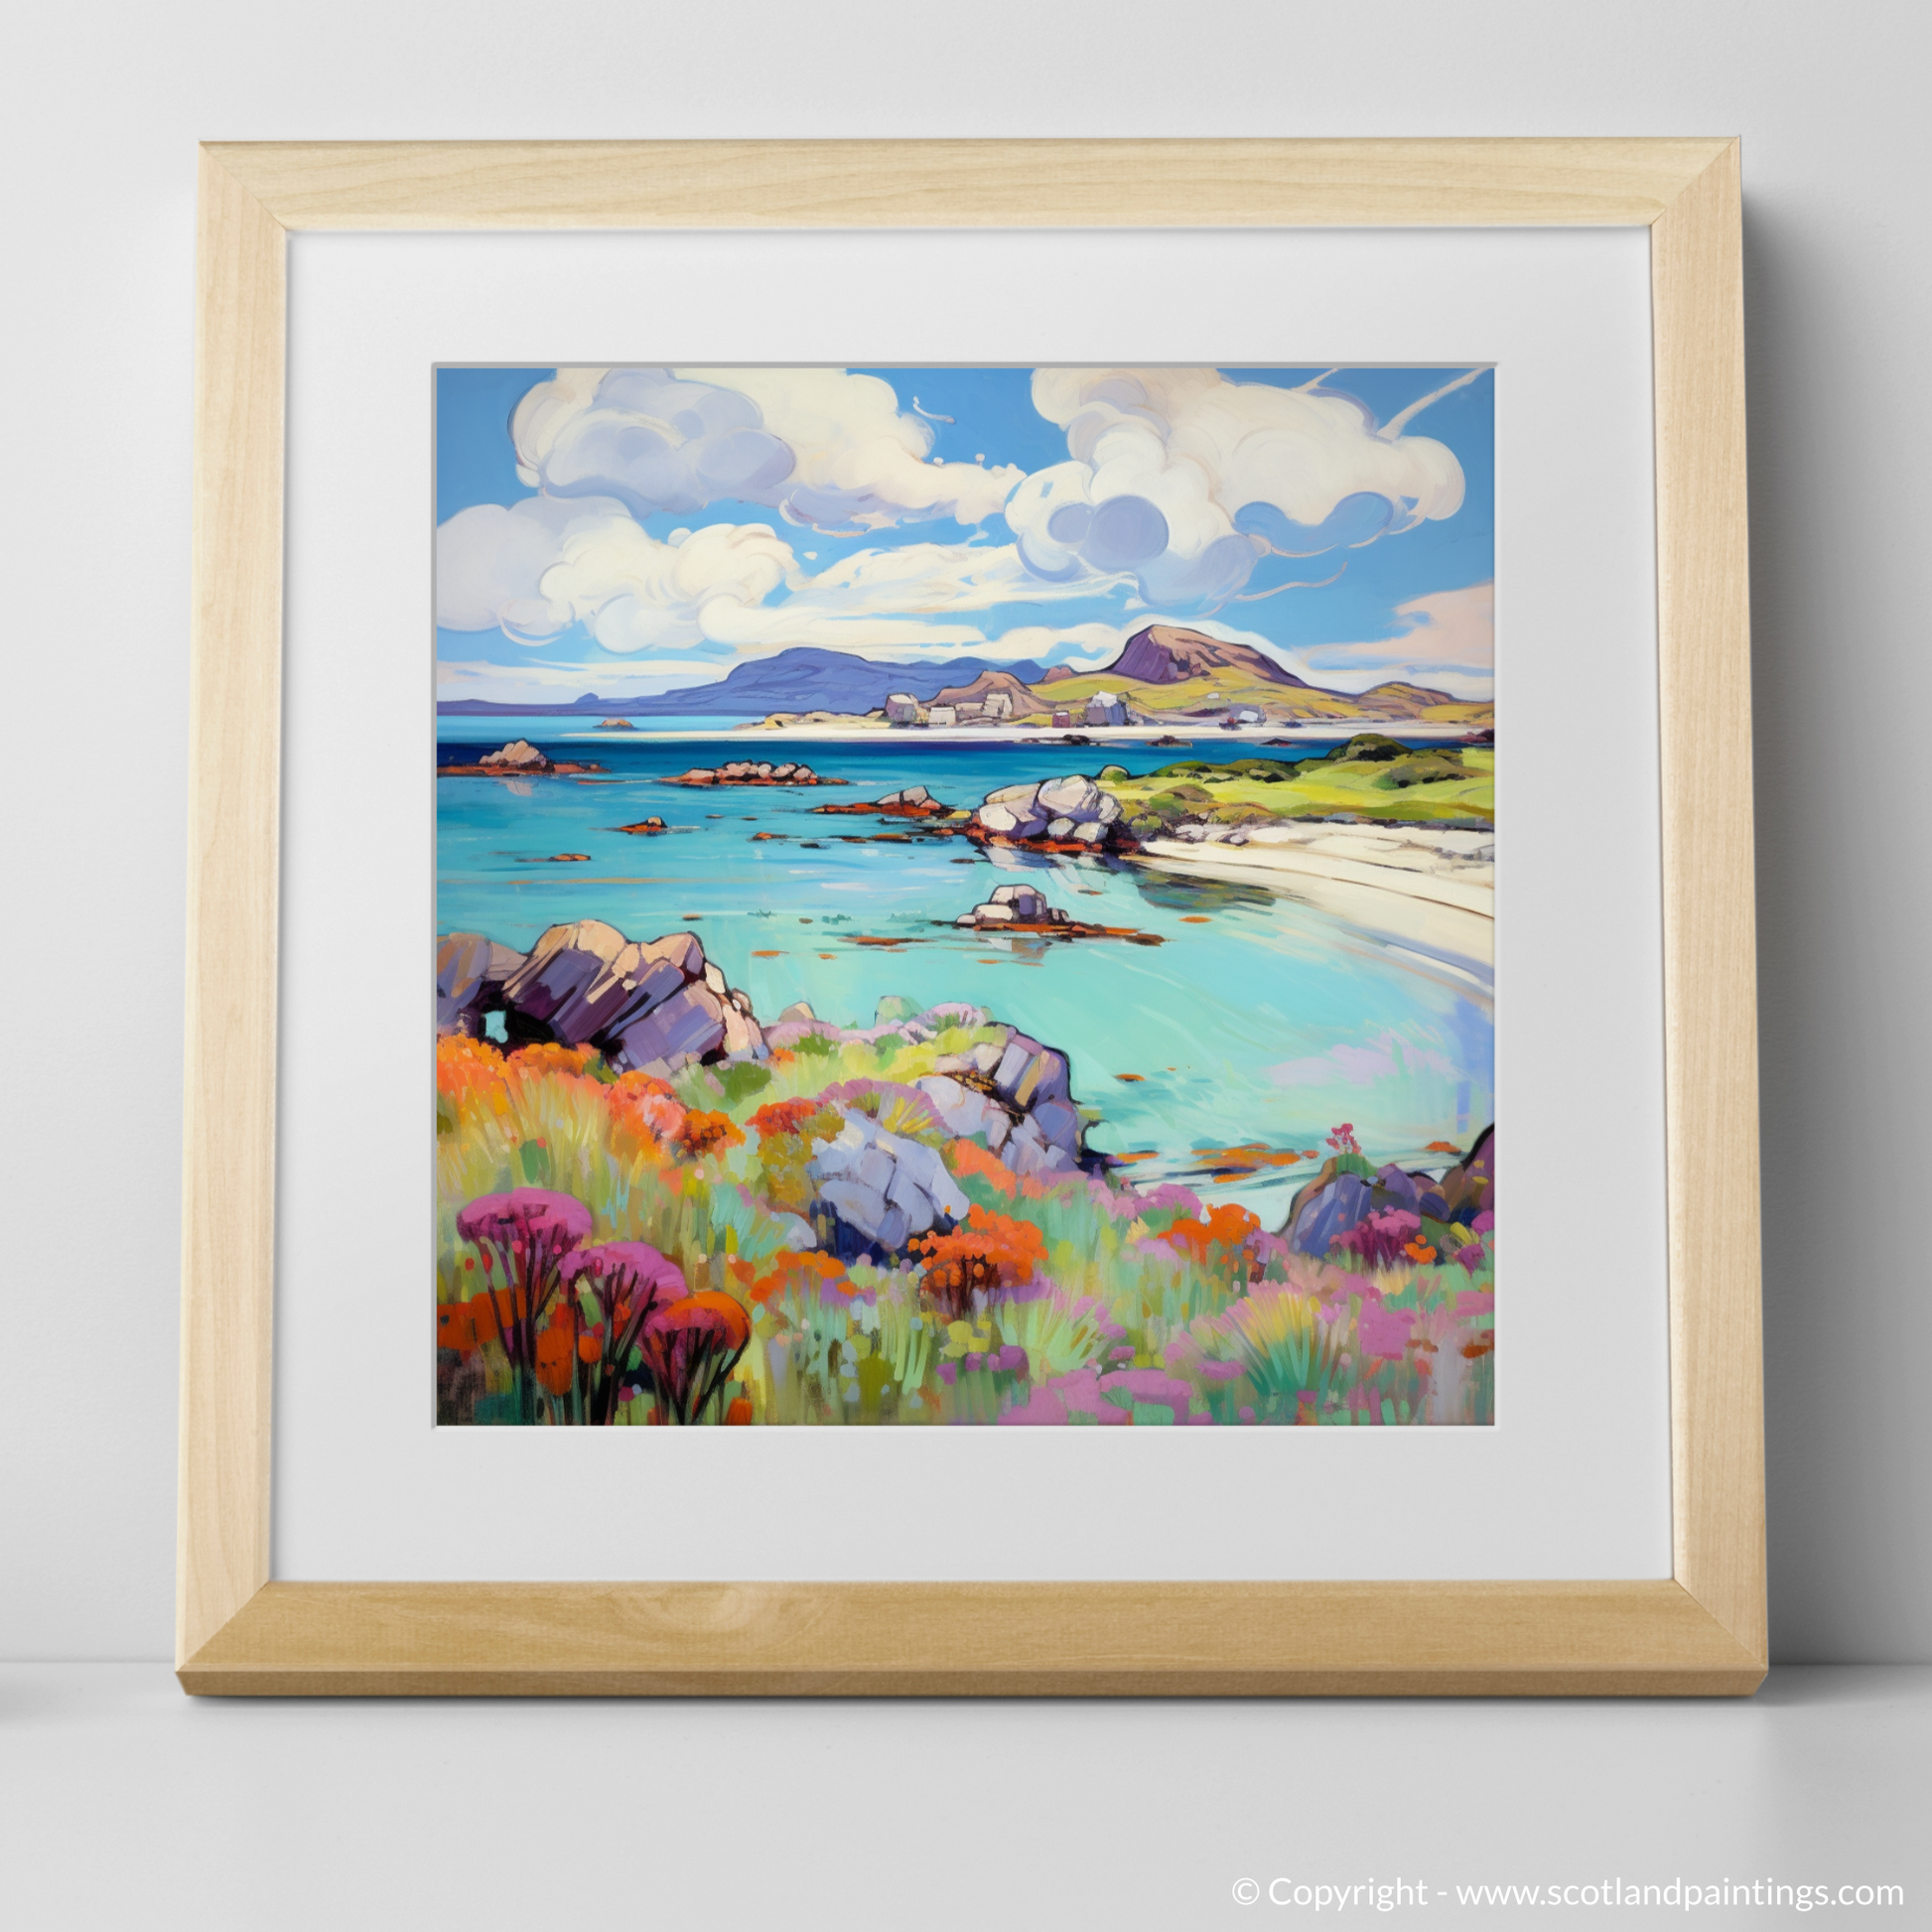 Art Print of Isle of Iona, Inner Hebrides in summer with a natural frame